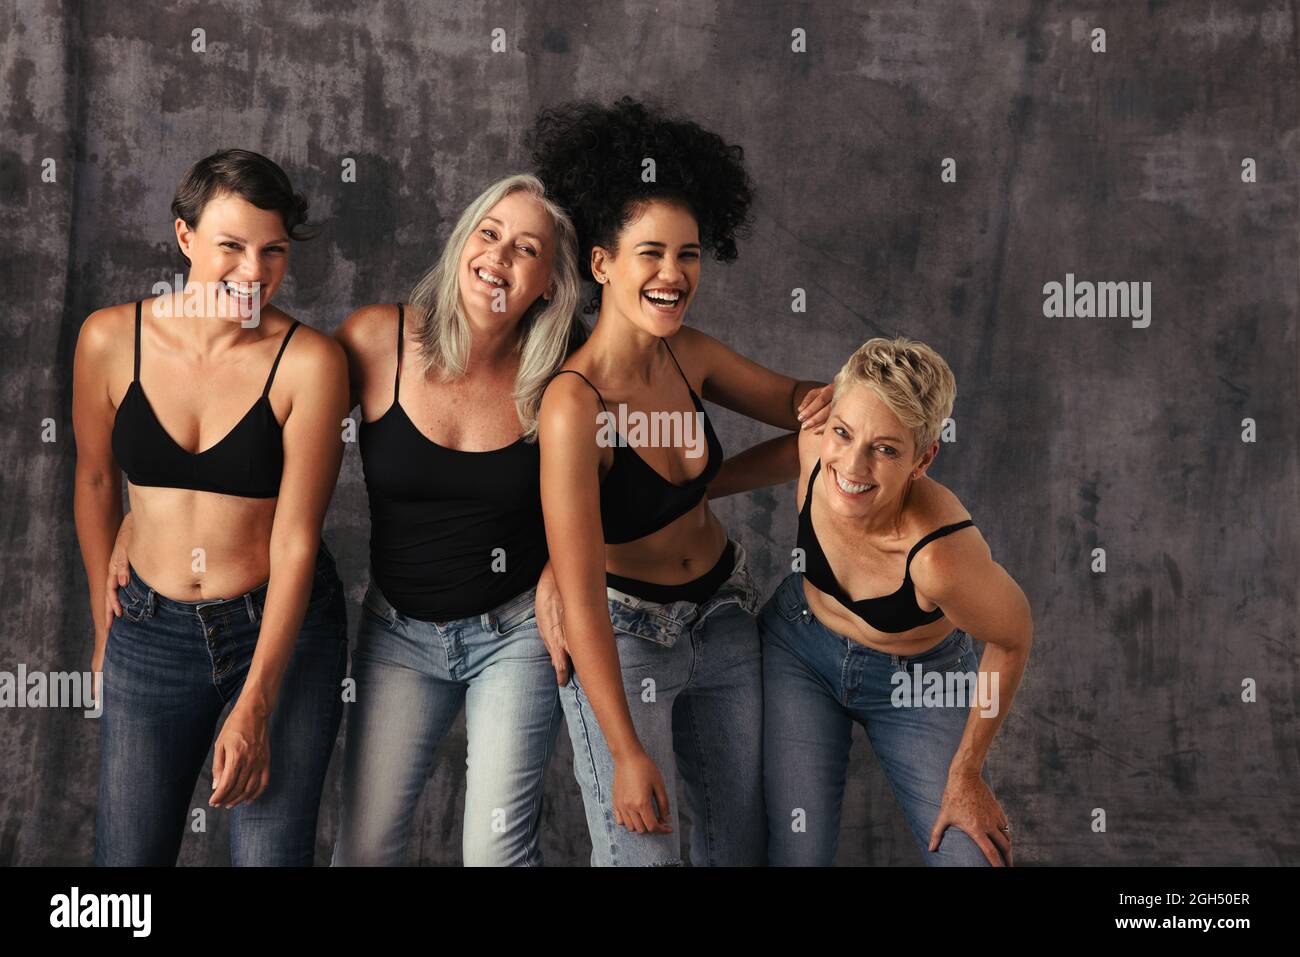 Stylish Women Of Different Ages Having Fun While Wearing Jeans